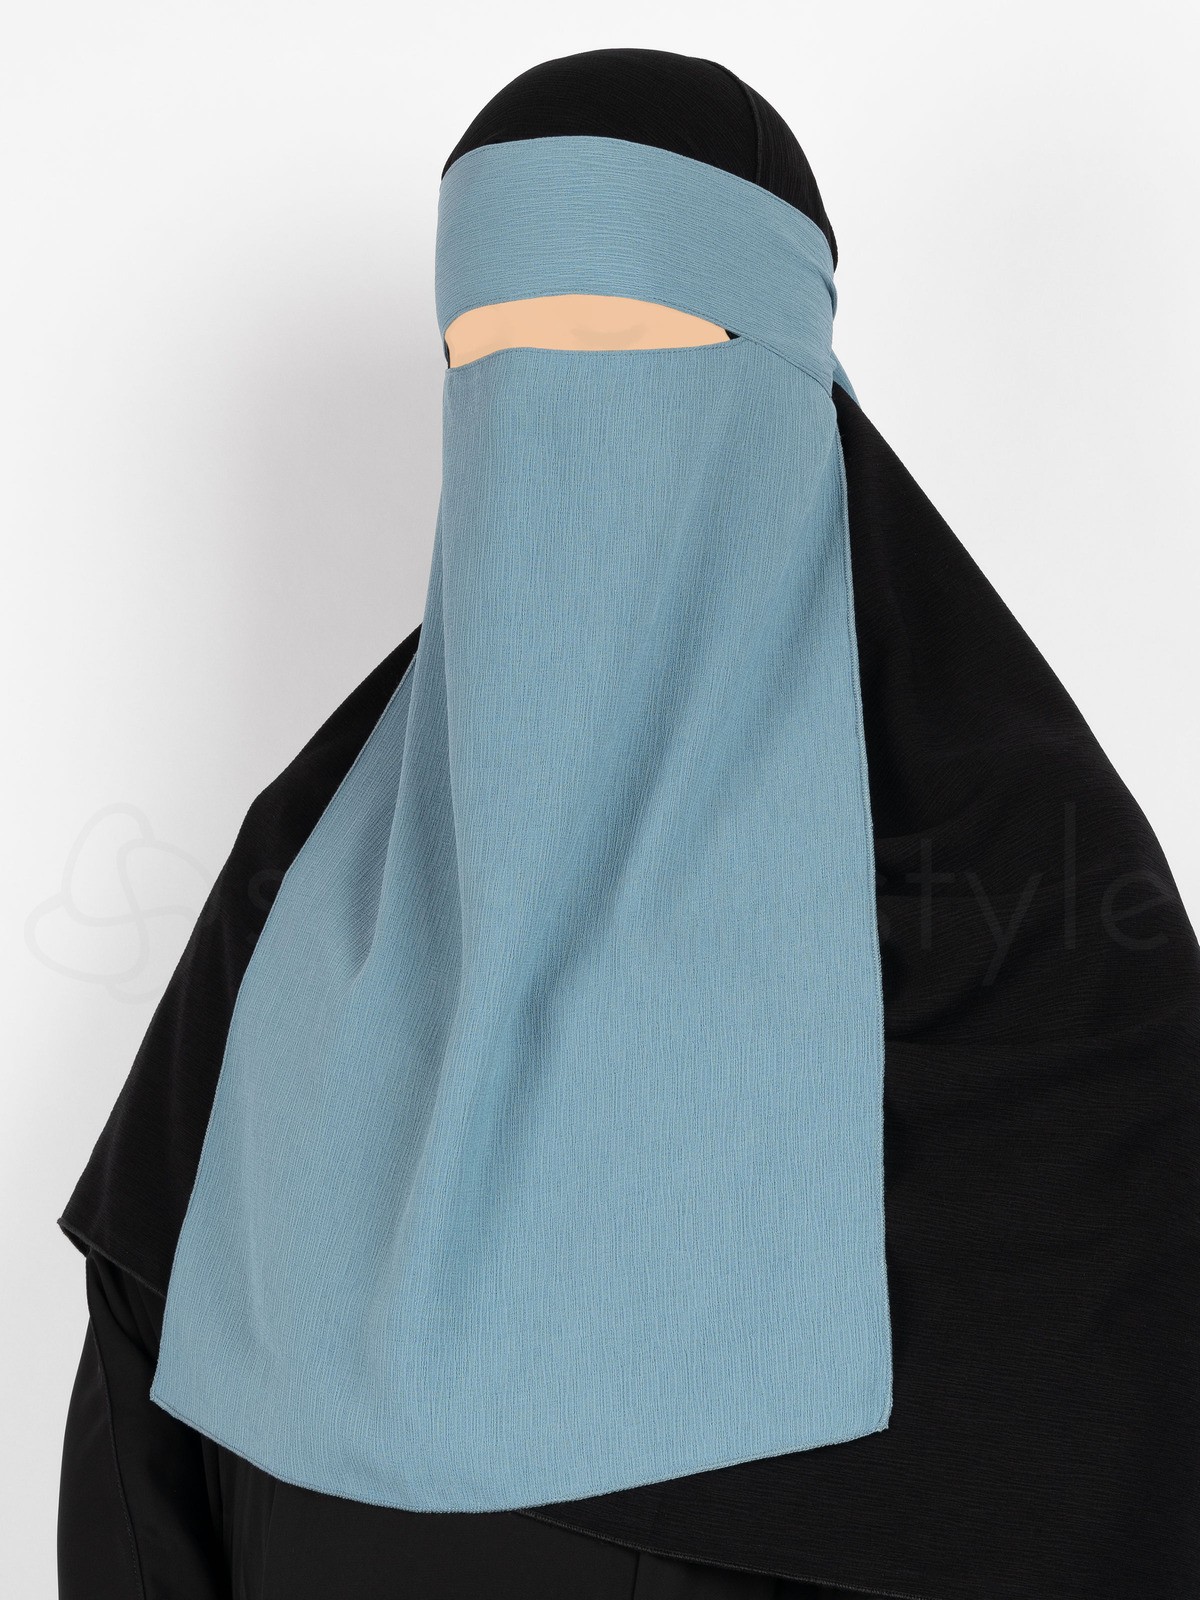 Sunnah Style - Brushed One Layer Niqab (Mesa Rose)